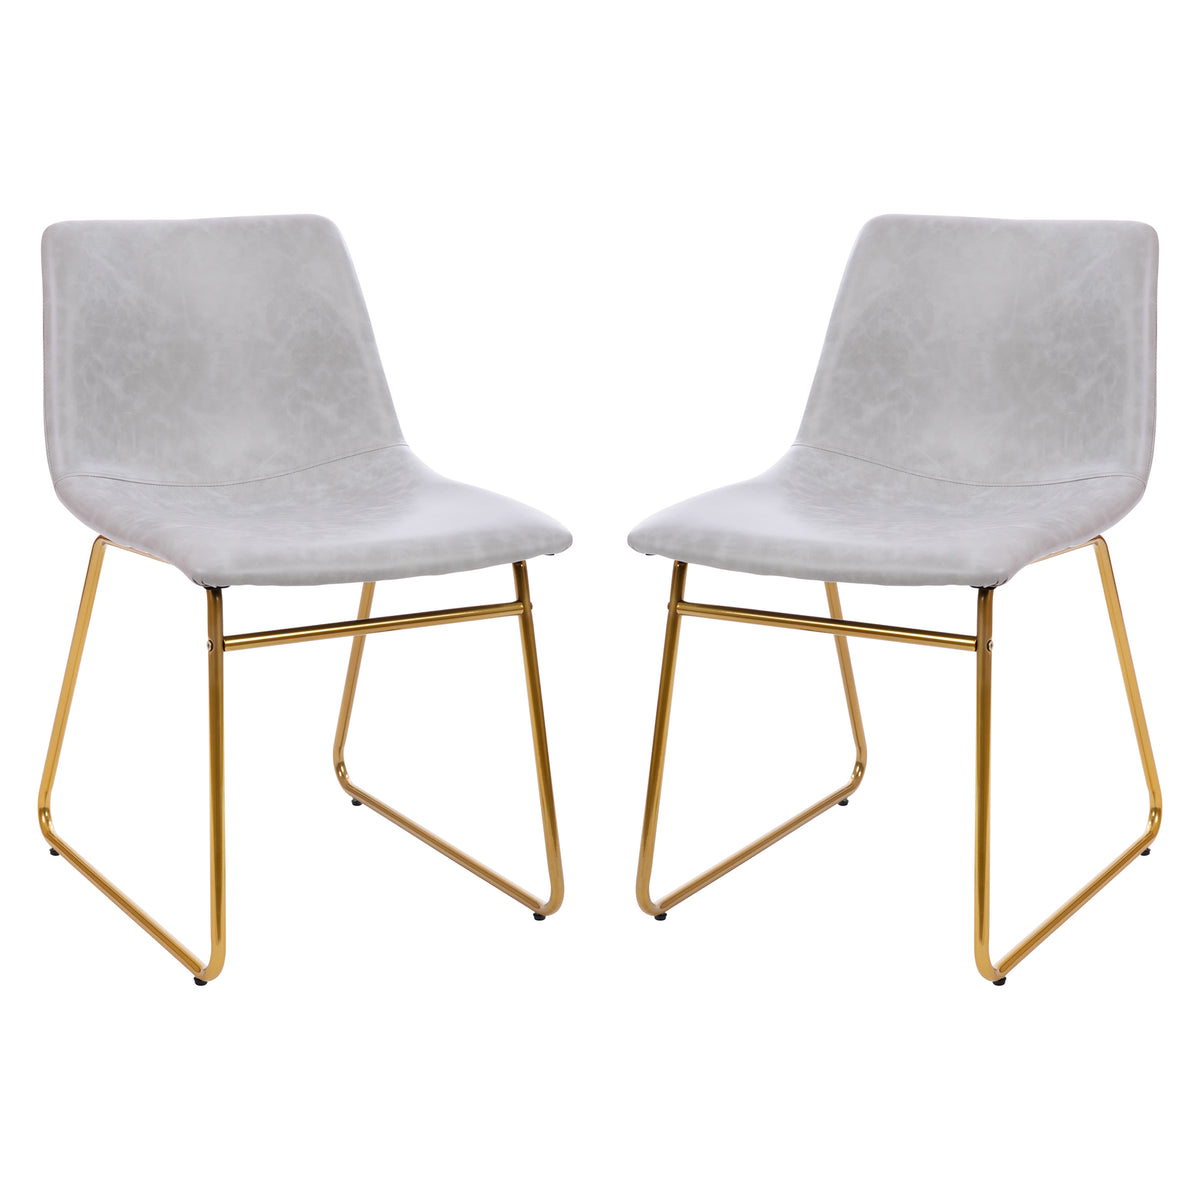 Light Gray LeatherSoft/Gold Frame |#| 18 Inch Indoor Dining Table Chairs, Light Gray LeatherSoft/Gold Frame-Set of 2